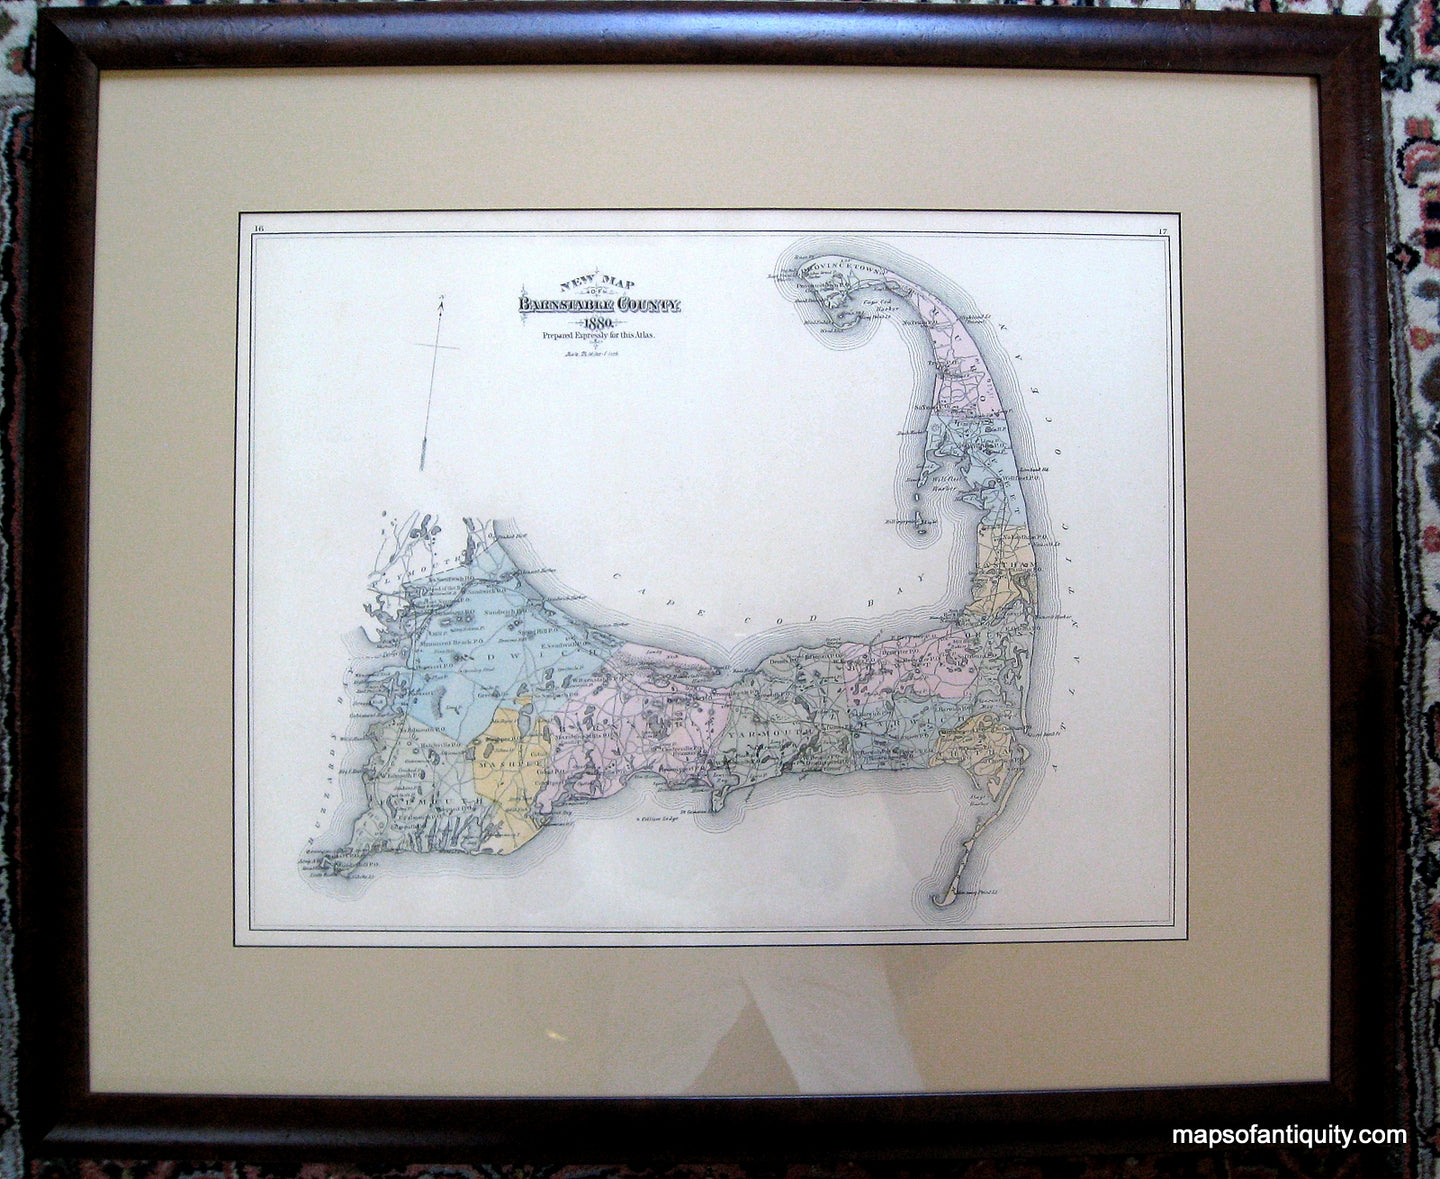 Framed-Reproduction-Framed-Reproduction-New-Map-of-Barnstable-County-1880-Framed-Reproduction-Cape-Cod-and-Islands-Reproduction-Framed--Maps-Of-Antiquity